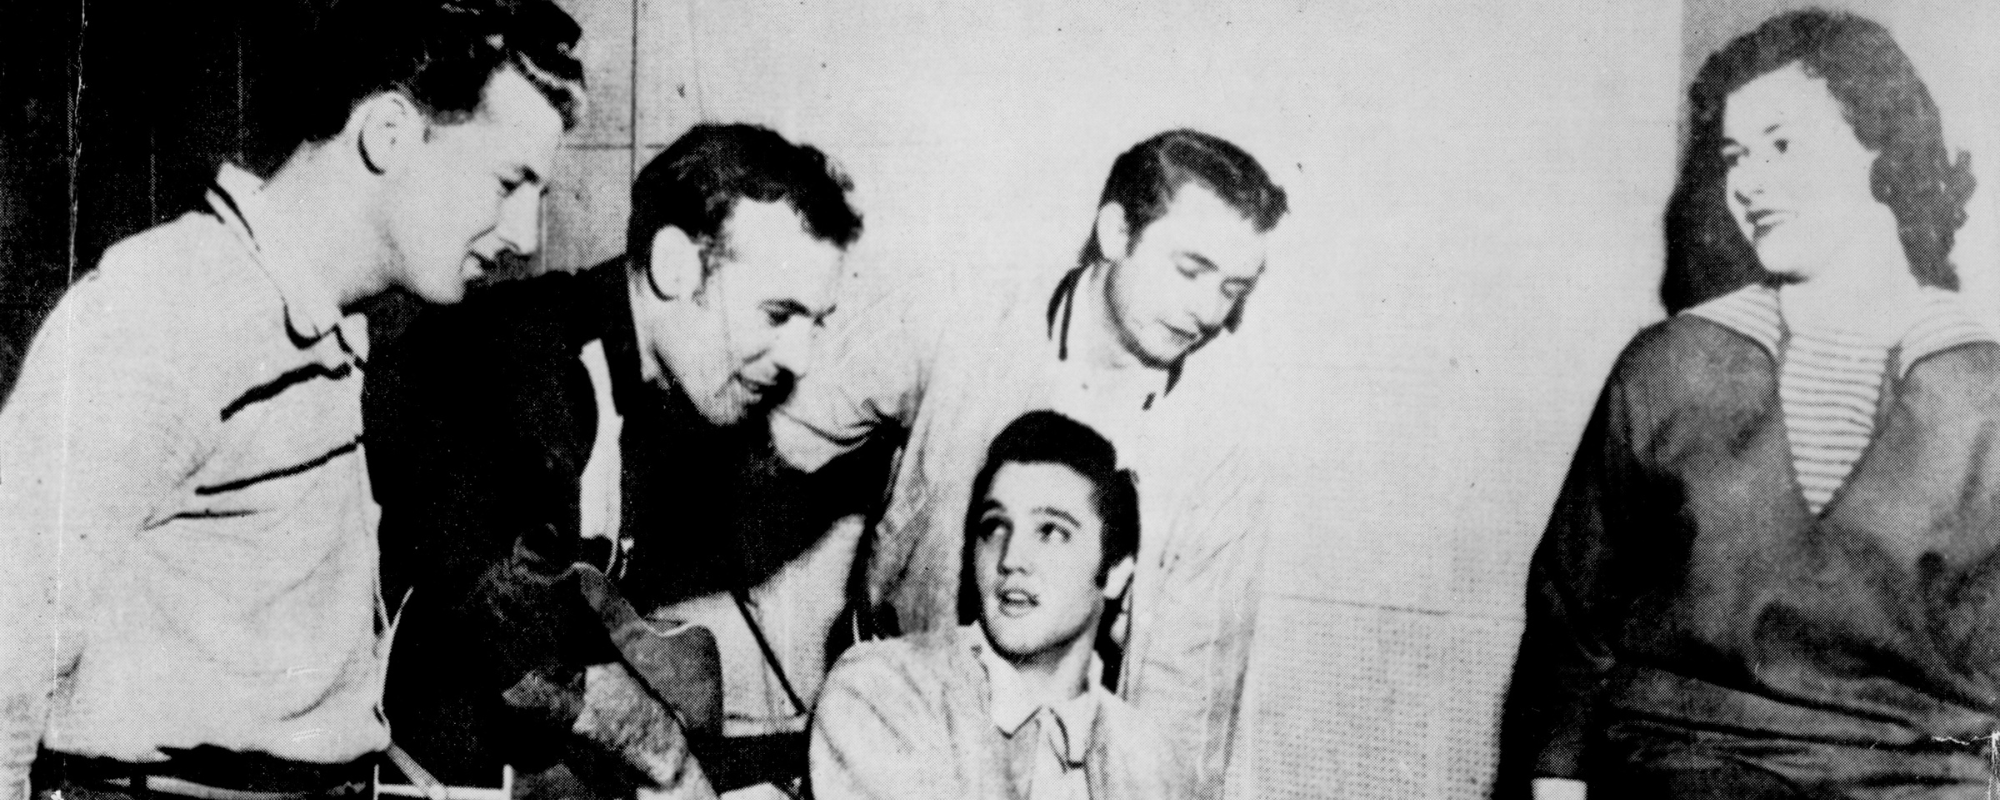 Remember When Sun Records’ “Million-Dollar Quartet” Reunited? Or the 3 Still Living Did, at Least, and Recruited the Big ‘O’